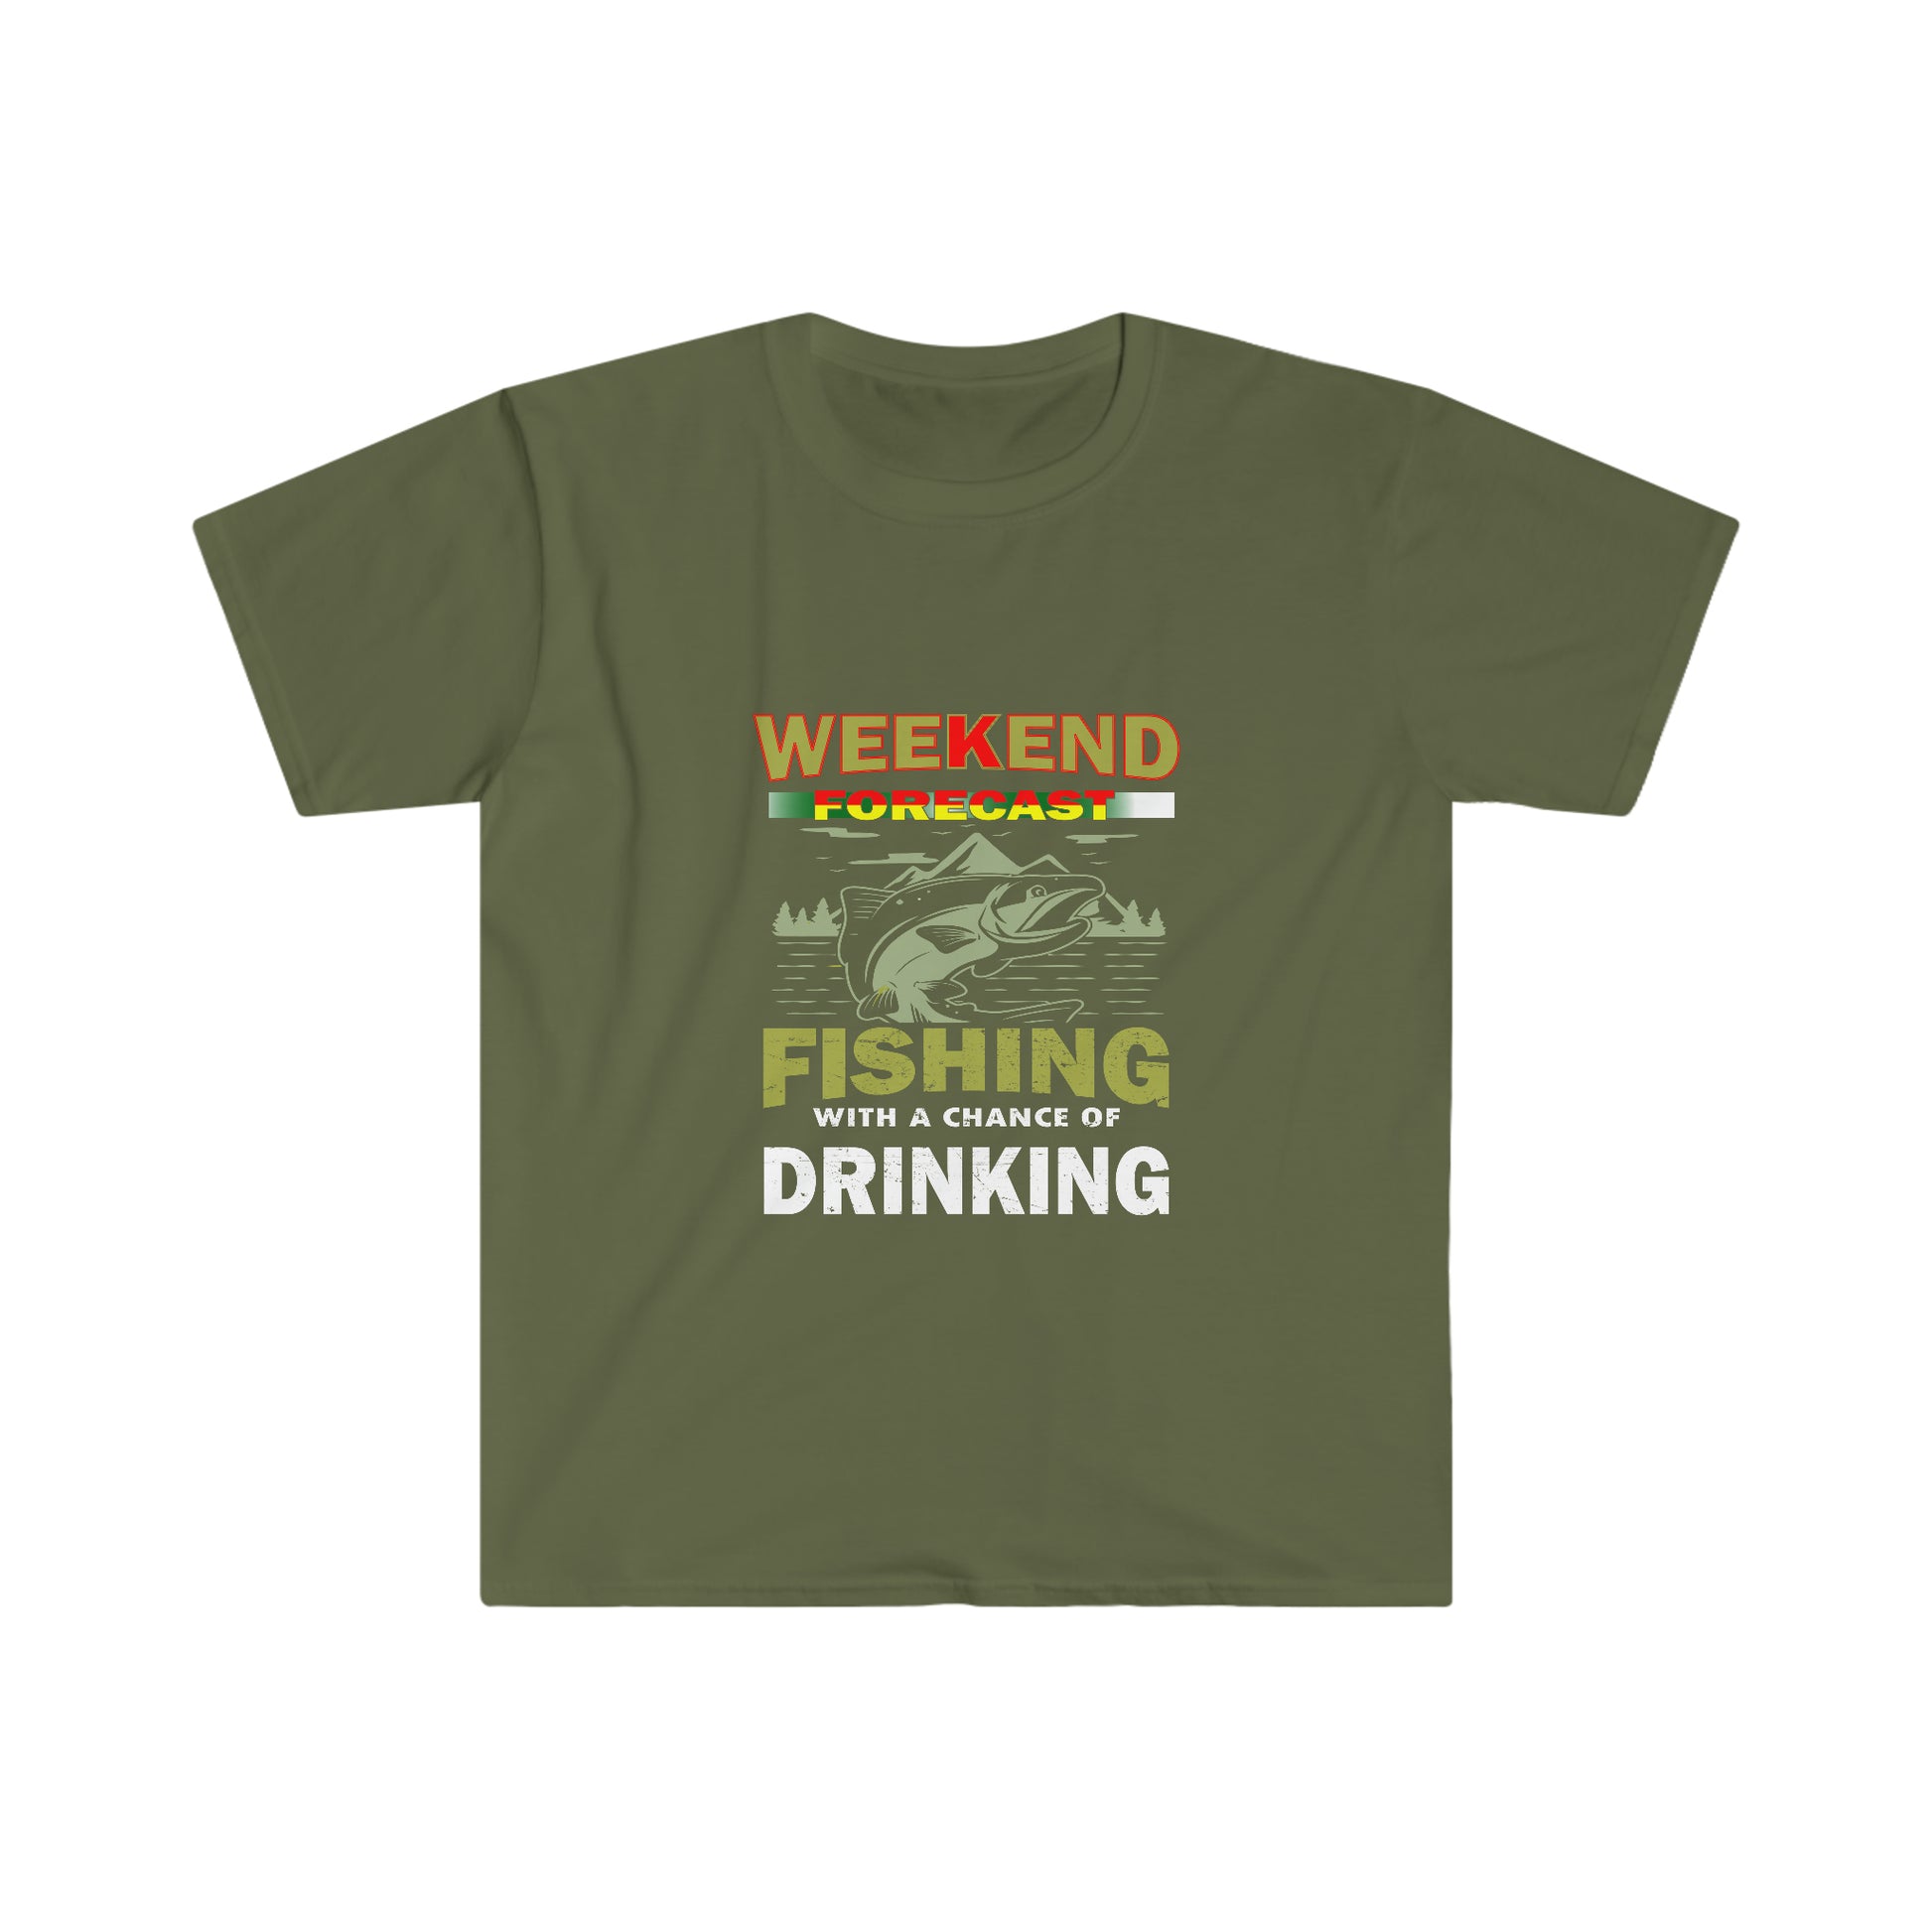 Weekend Forecast - Fishing With a Chance of Drinking - Urban Camper